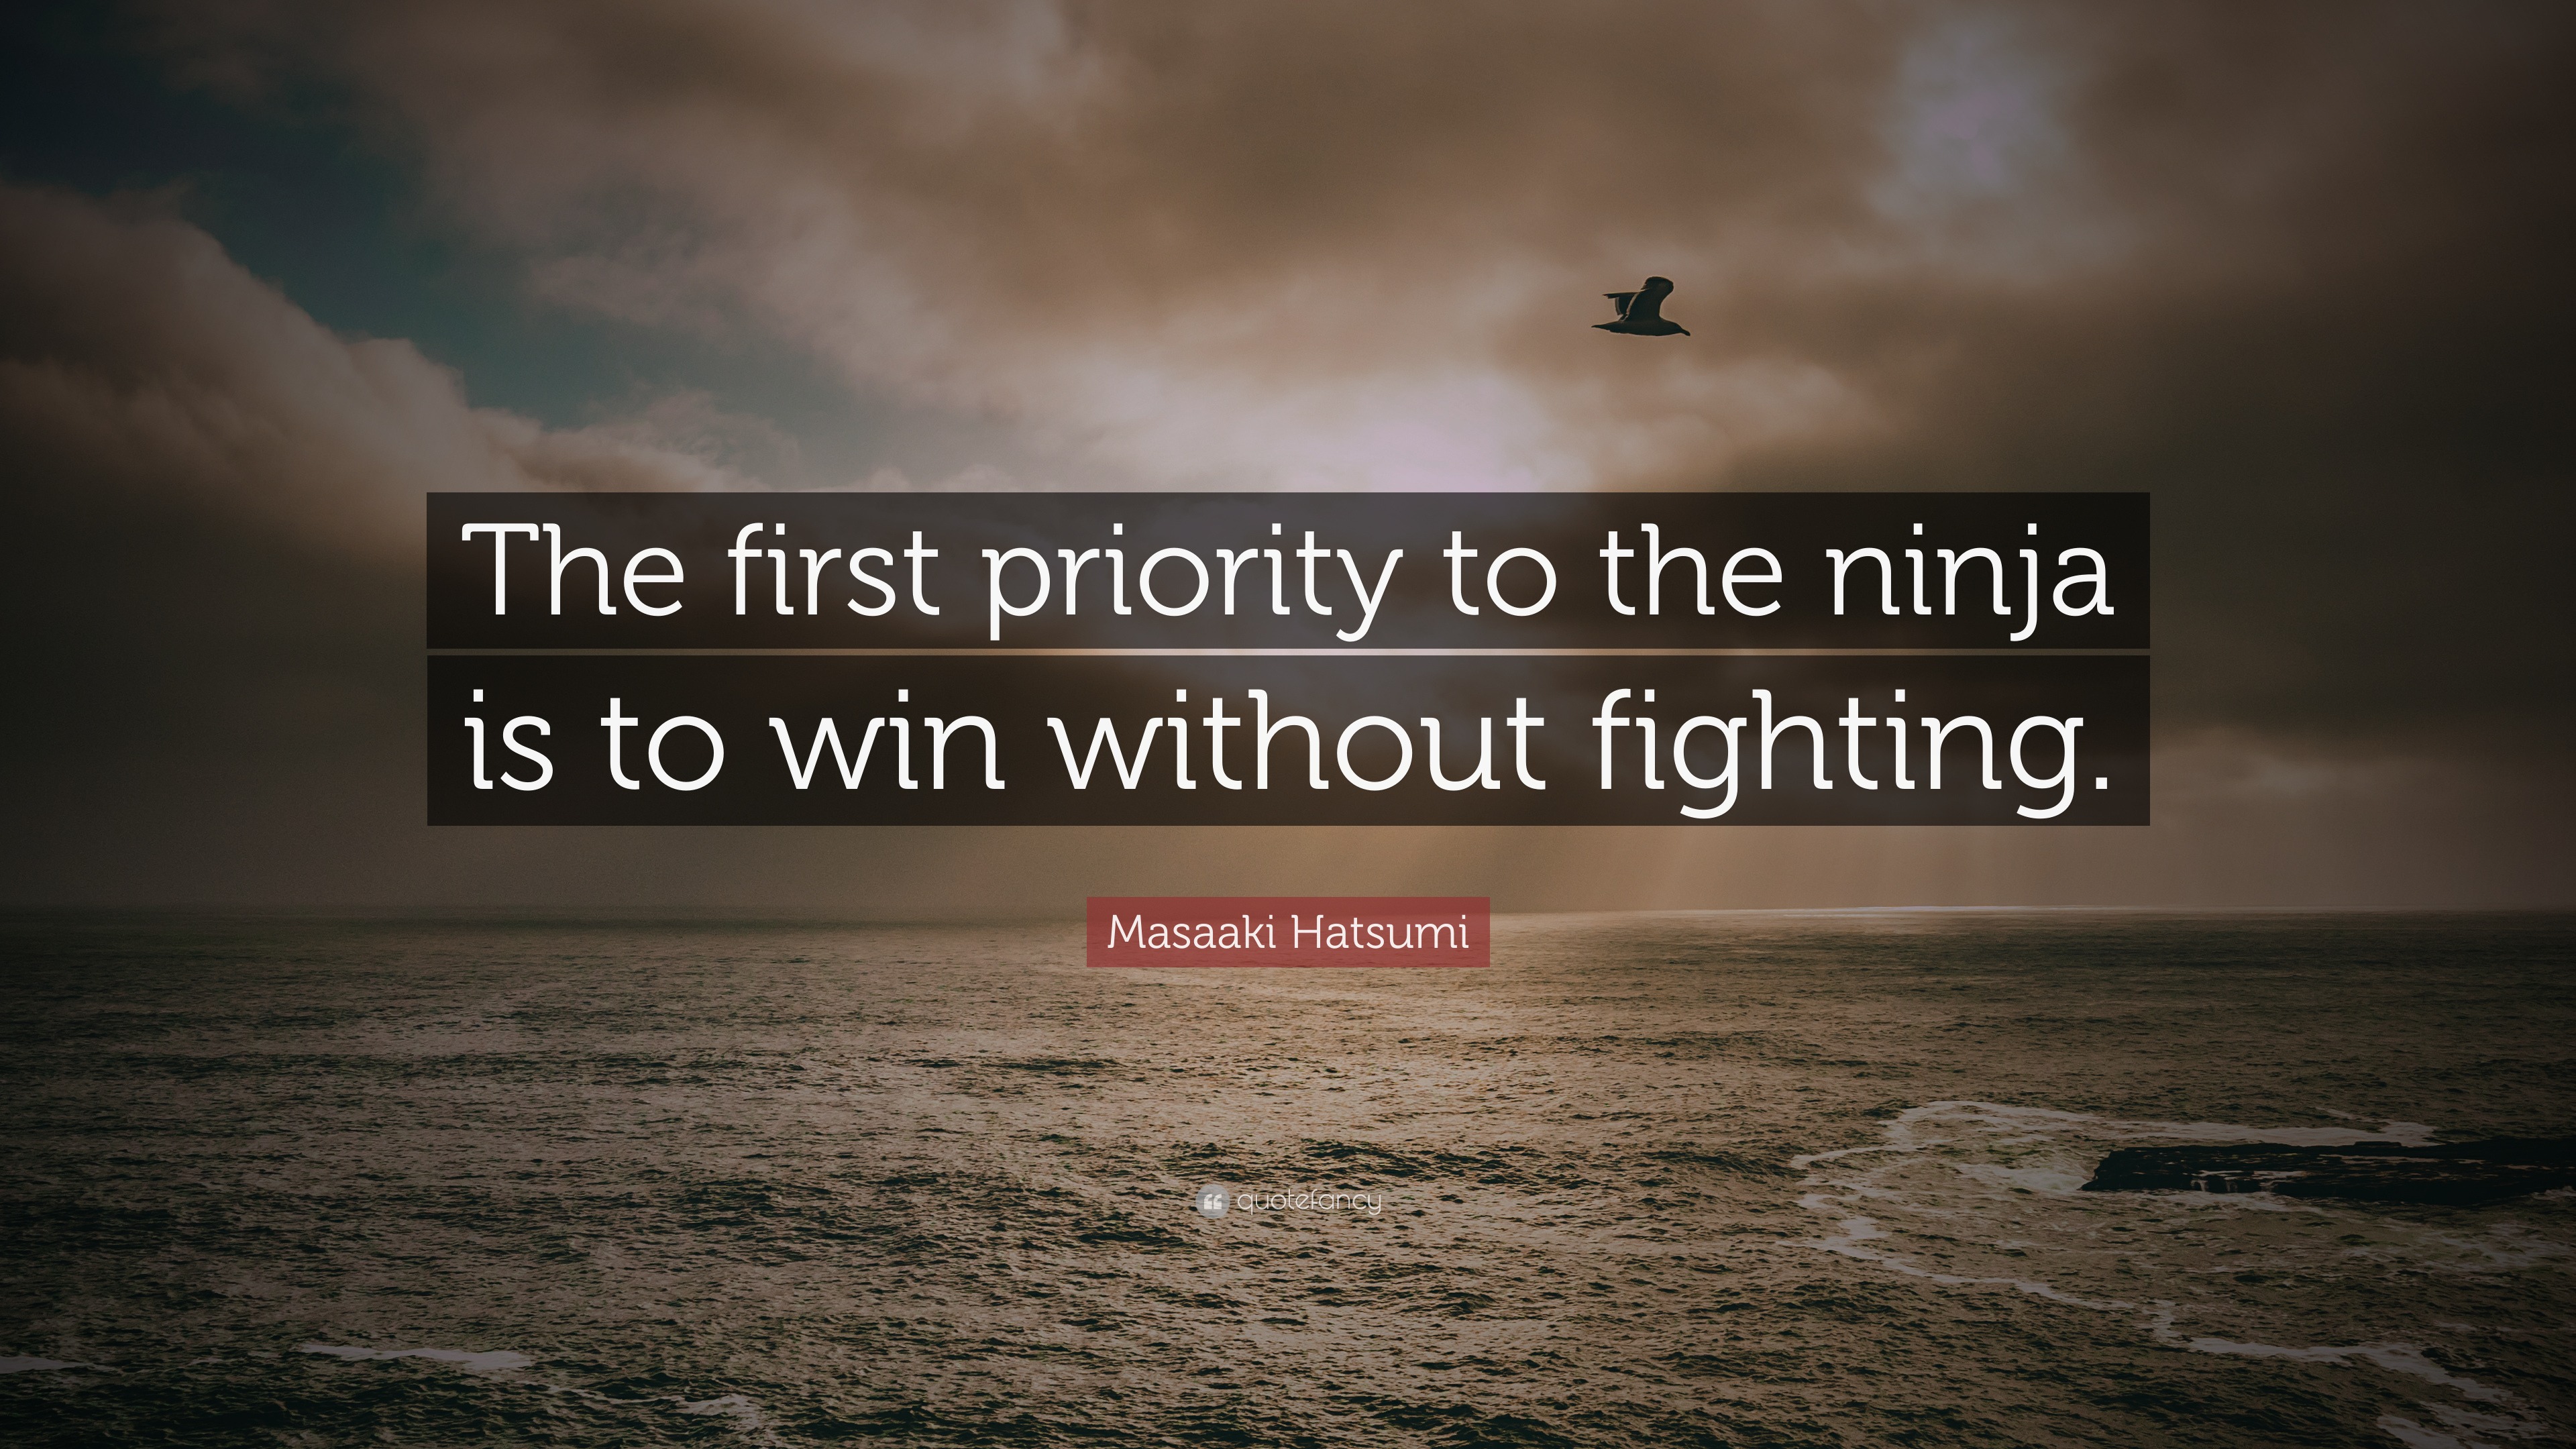 Masaaki Hatsumi Quote “The first priority to the ninja is